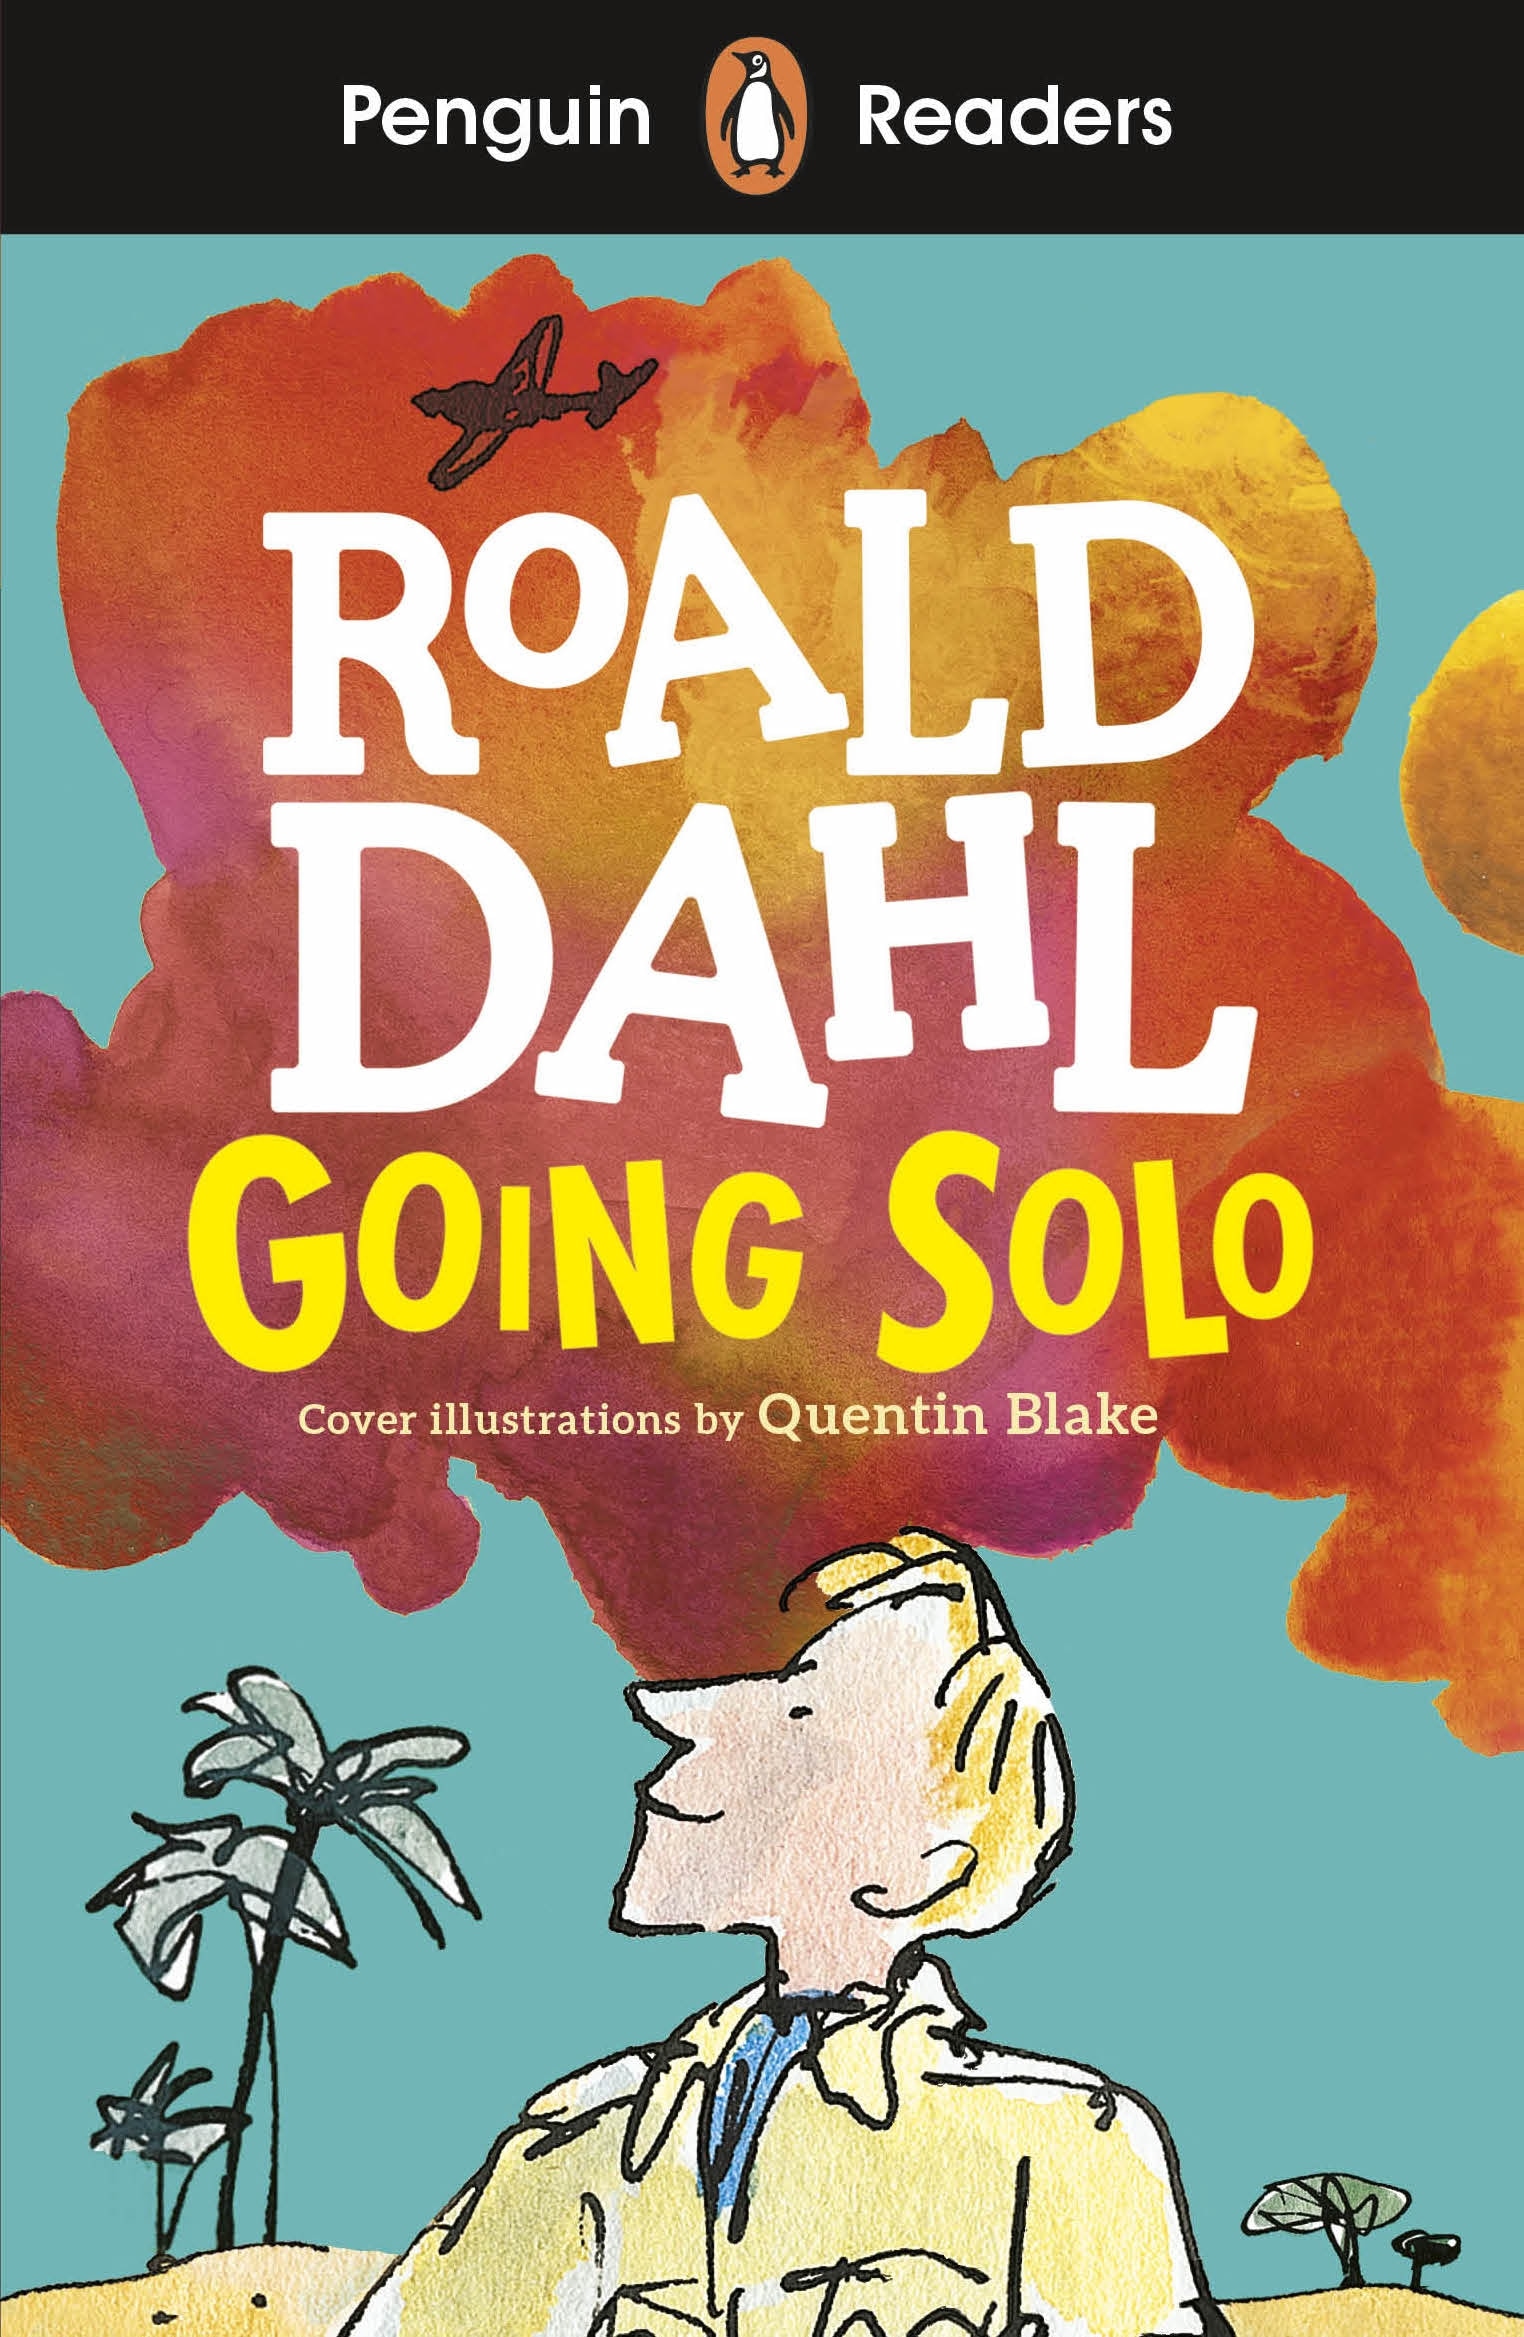 Book “Penguin Readers Level 4: Going Solo (ELT Graded Reader)” by Roald Dahl — May 14, 2020